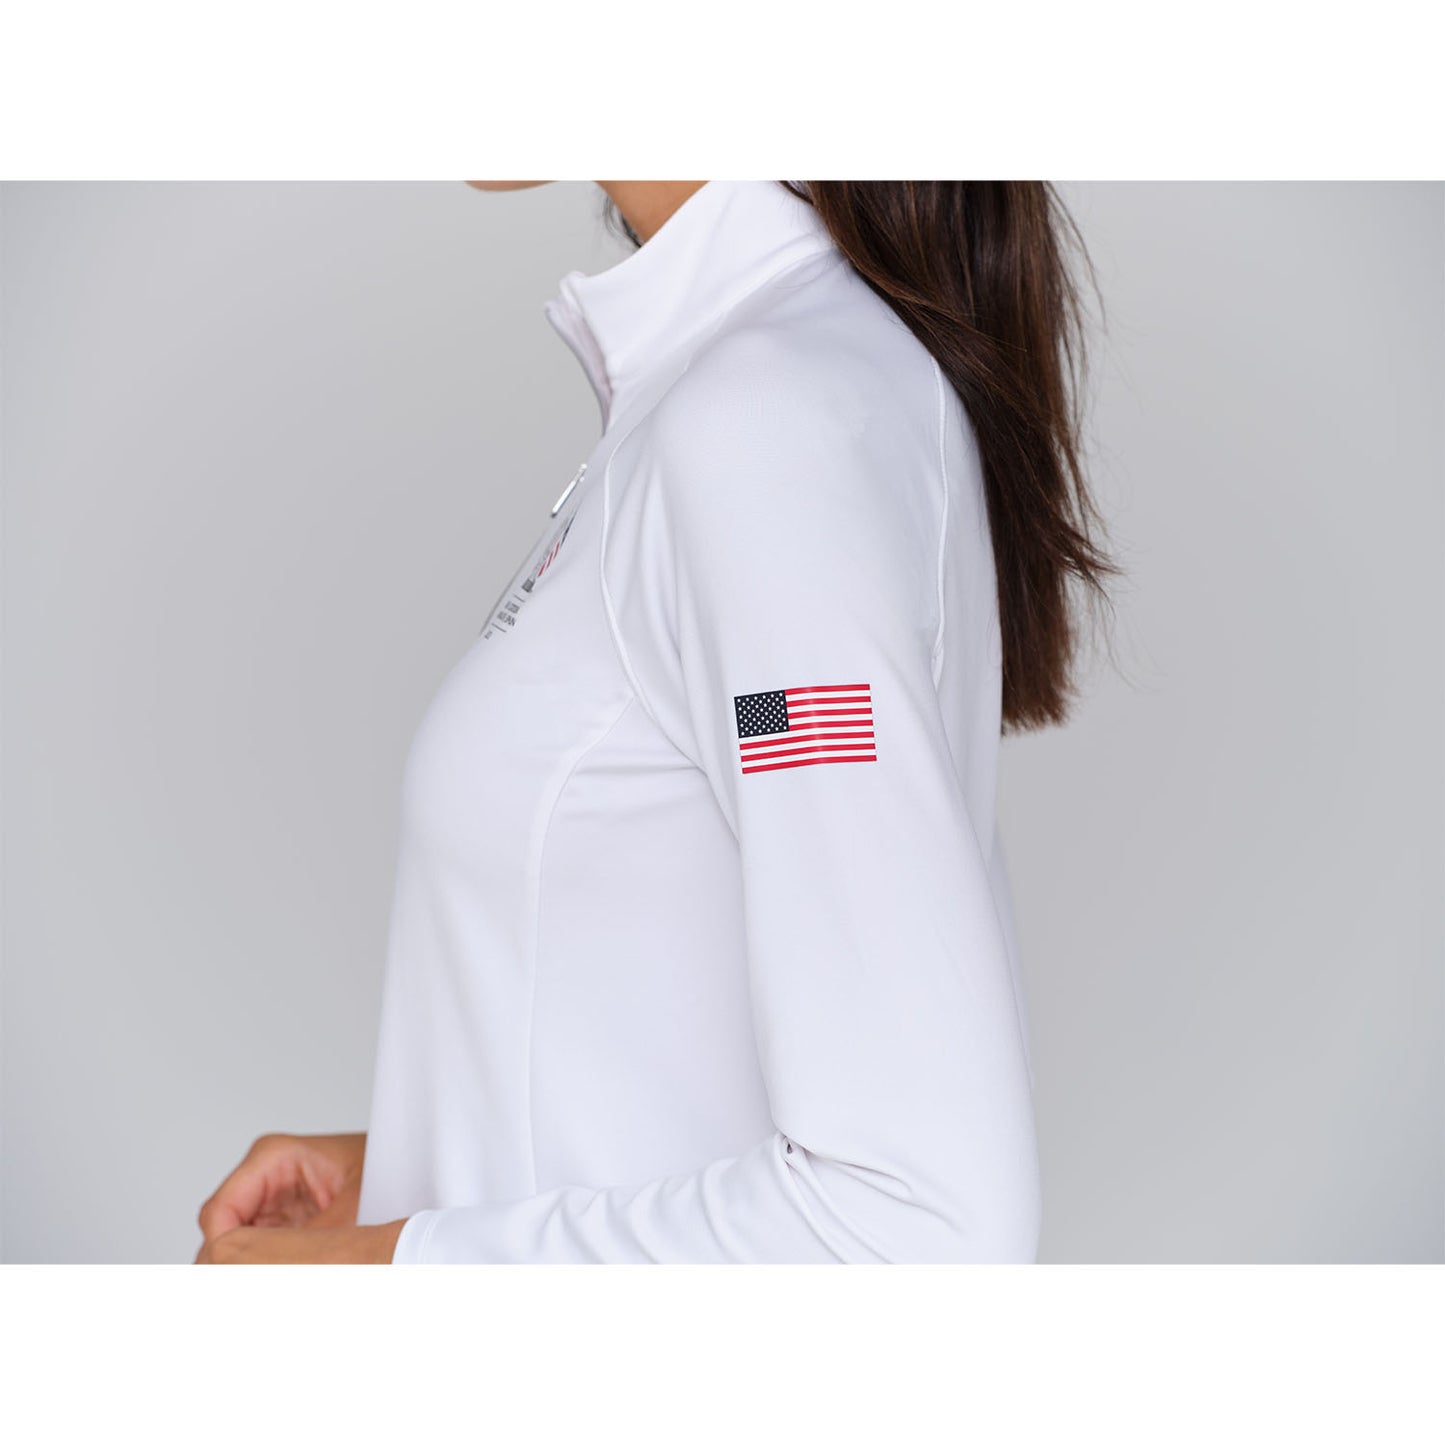 Dunning 2023 LPGA Official Solheim Cup Team Uniform Women's Player Jersey Performance Quarter Zip in White - Zoomed in Lifestyle Left Side View